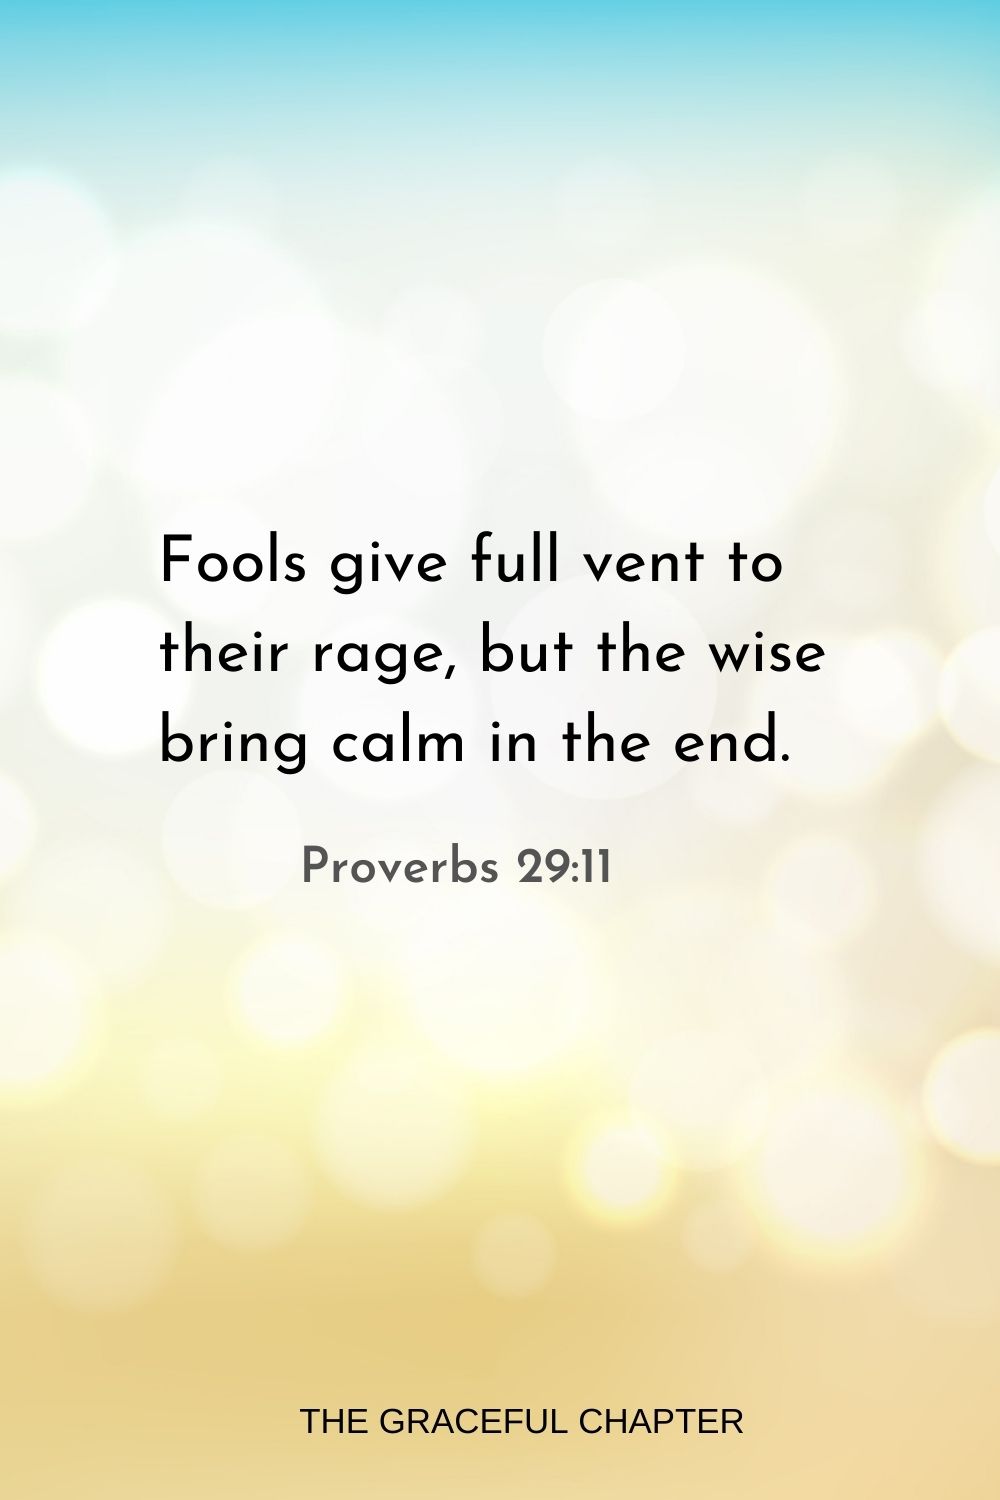 Fools give full vent to their rage, but the wise bring calm in the end. Proverbs 29:11